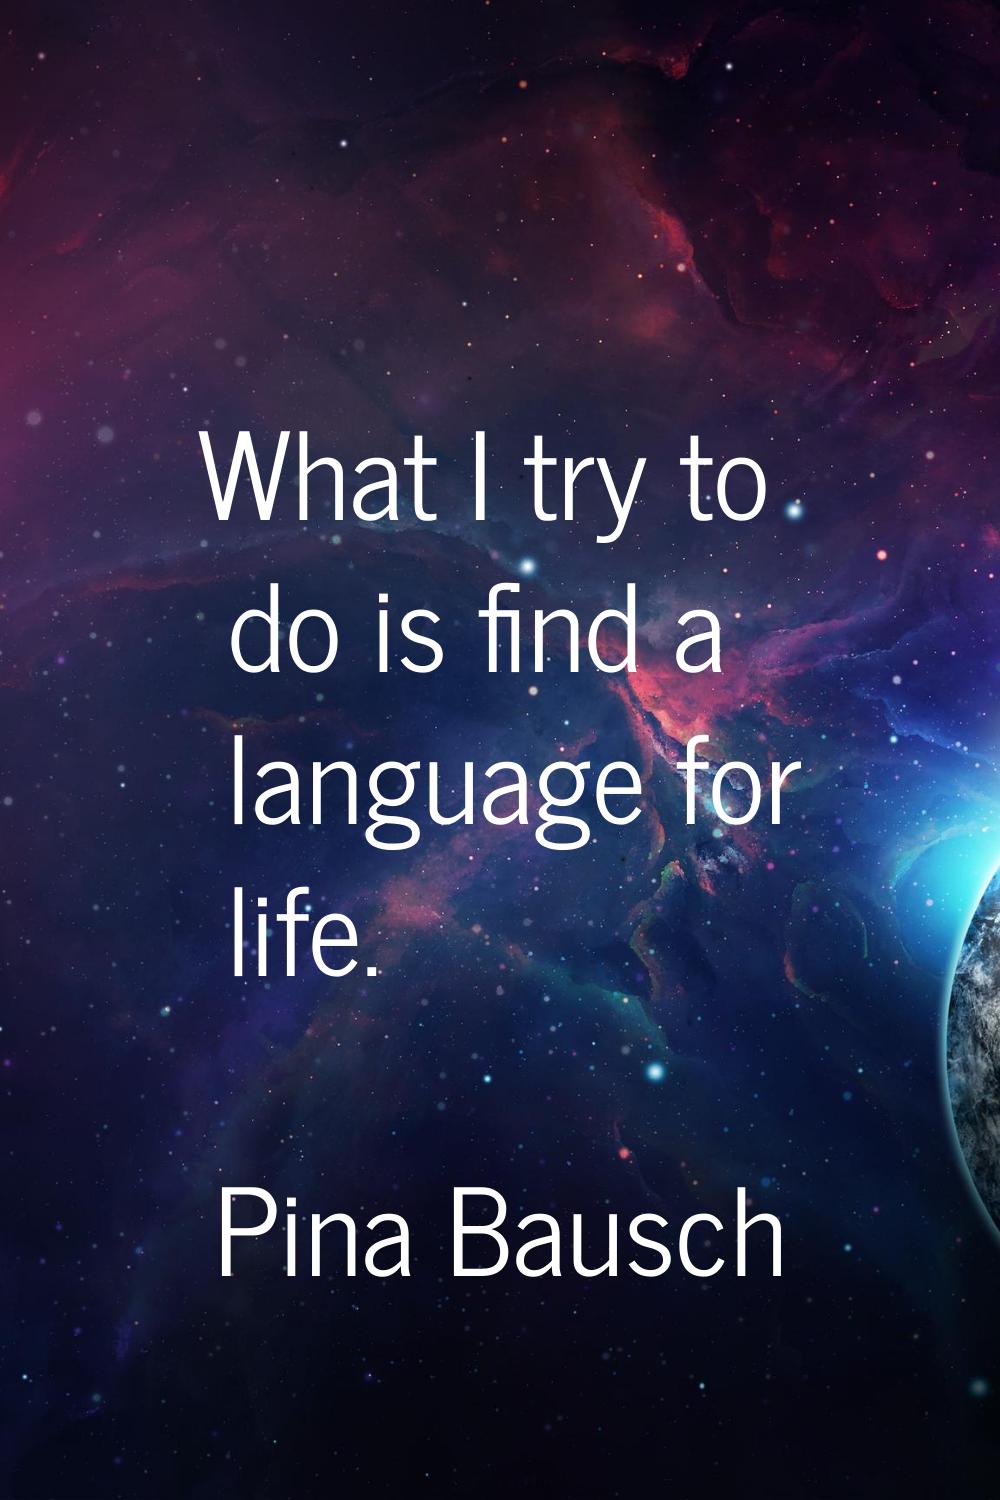 What I try to do is find a language for life.